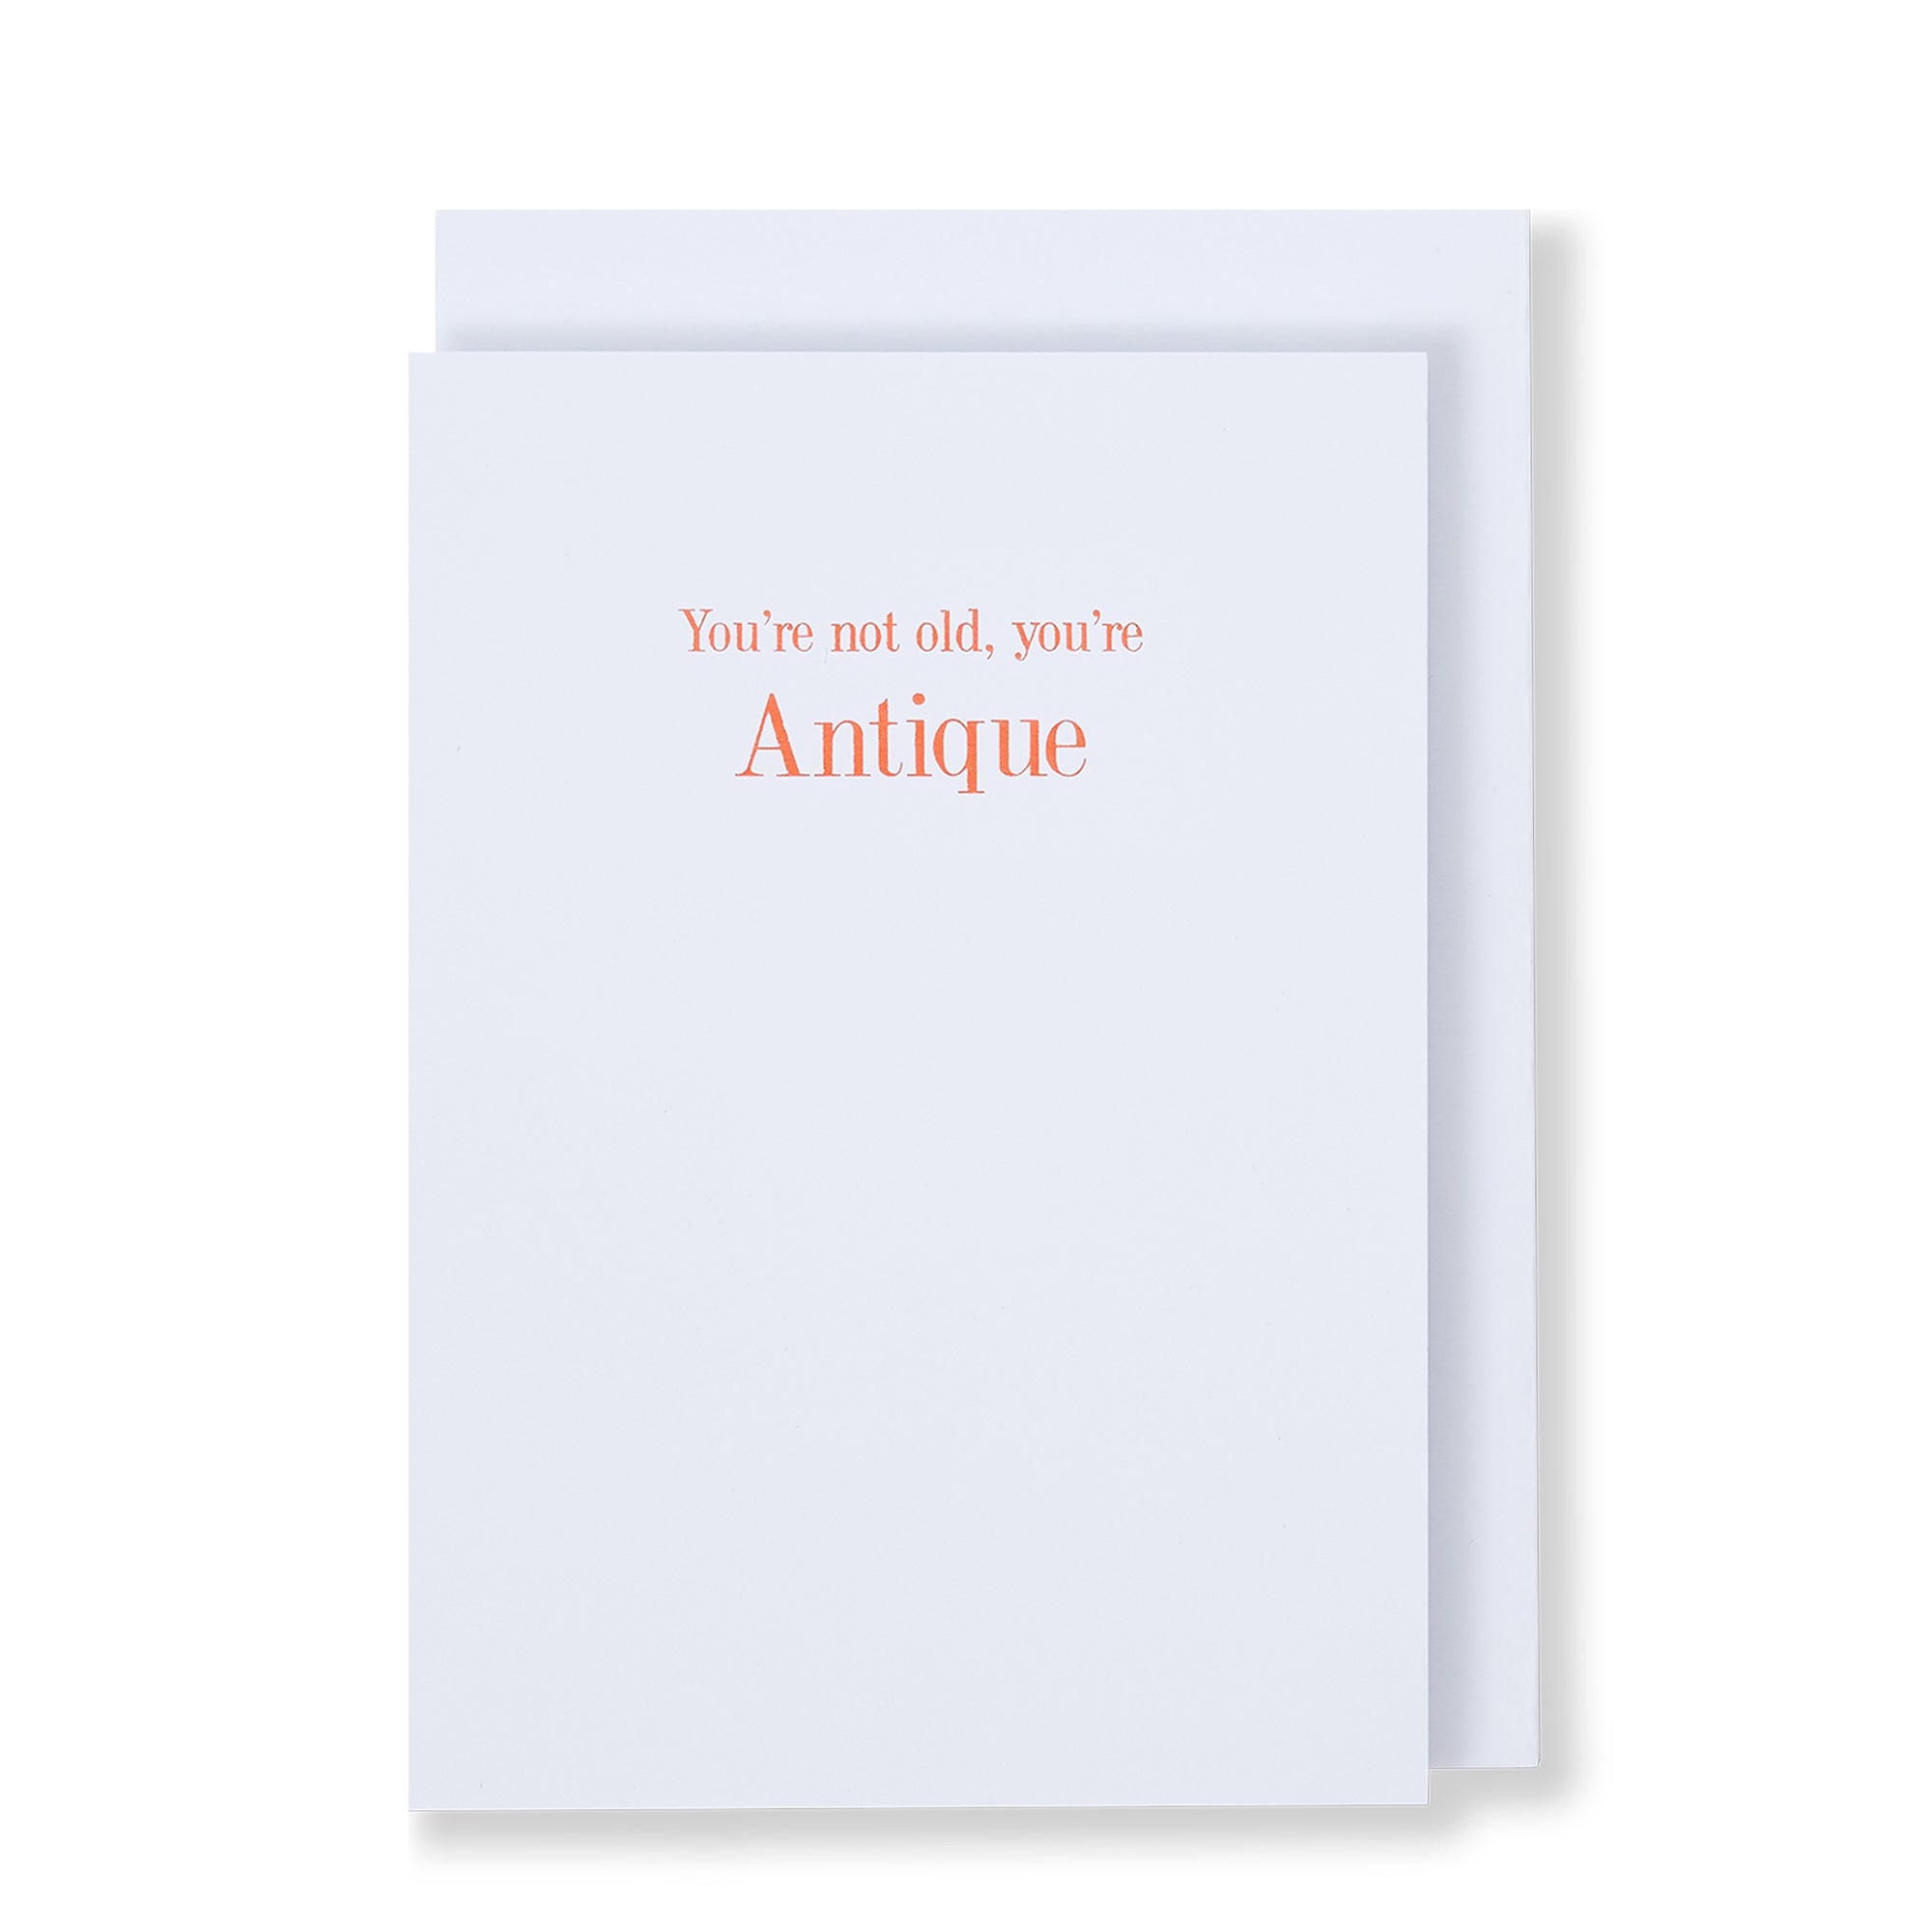 You're Not Old You’re Antique Greeting Card in White, Front